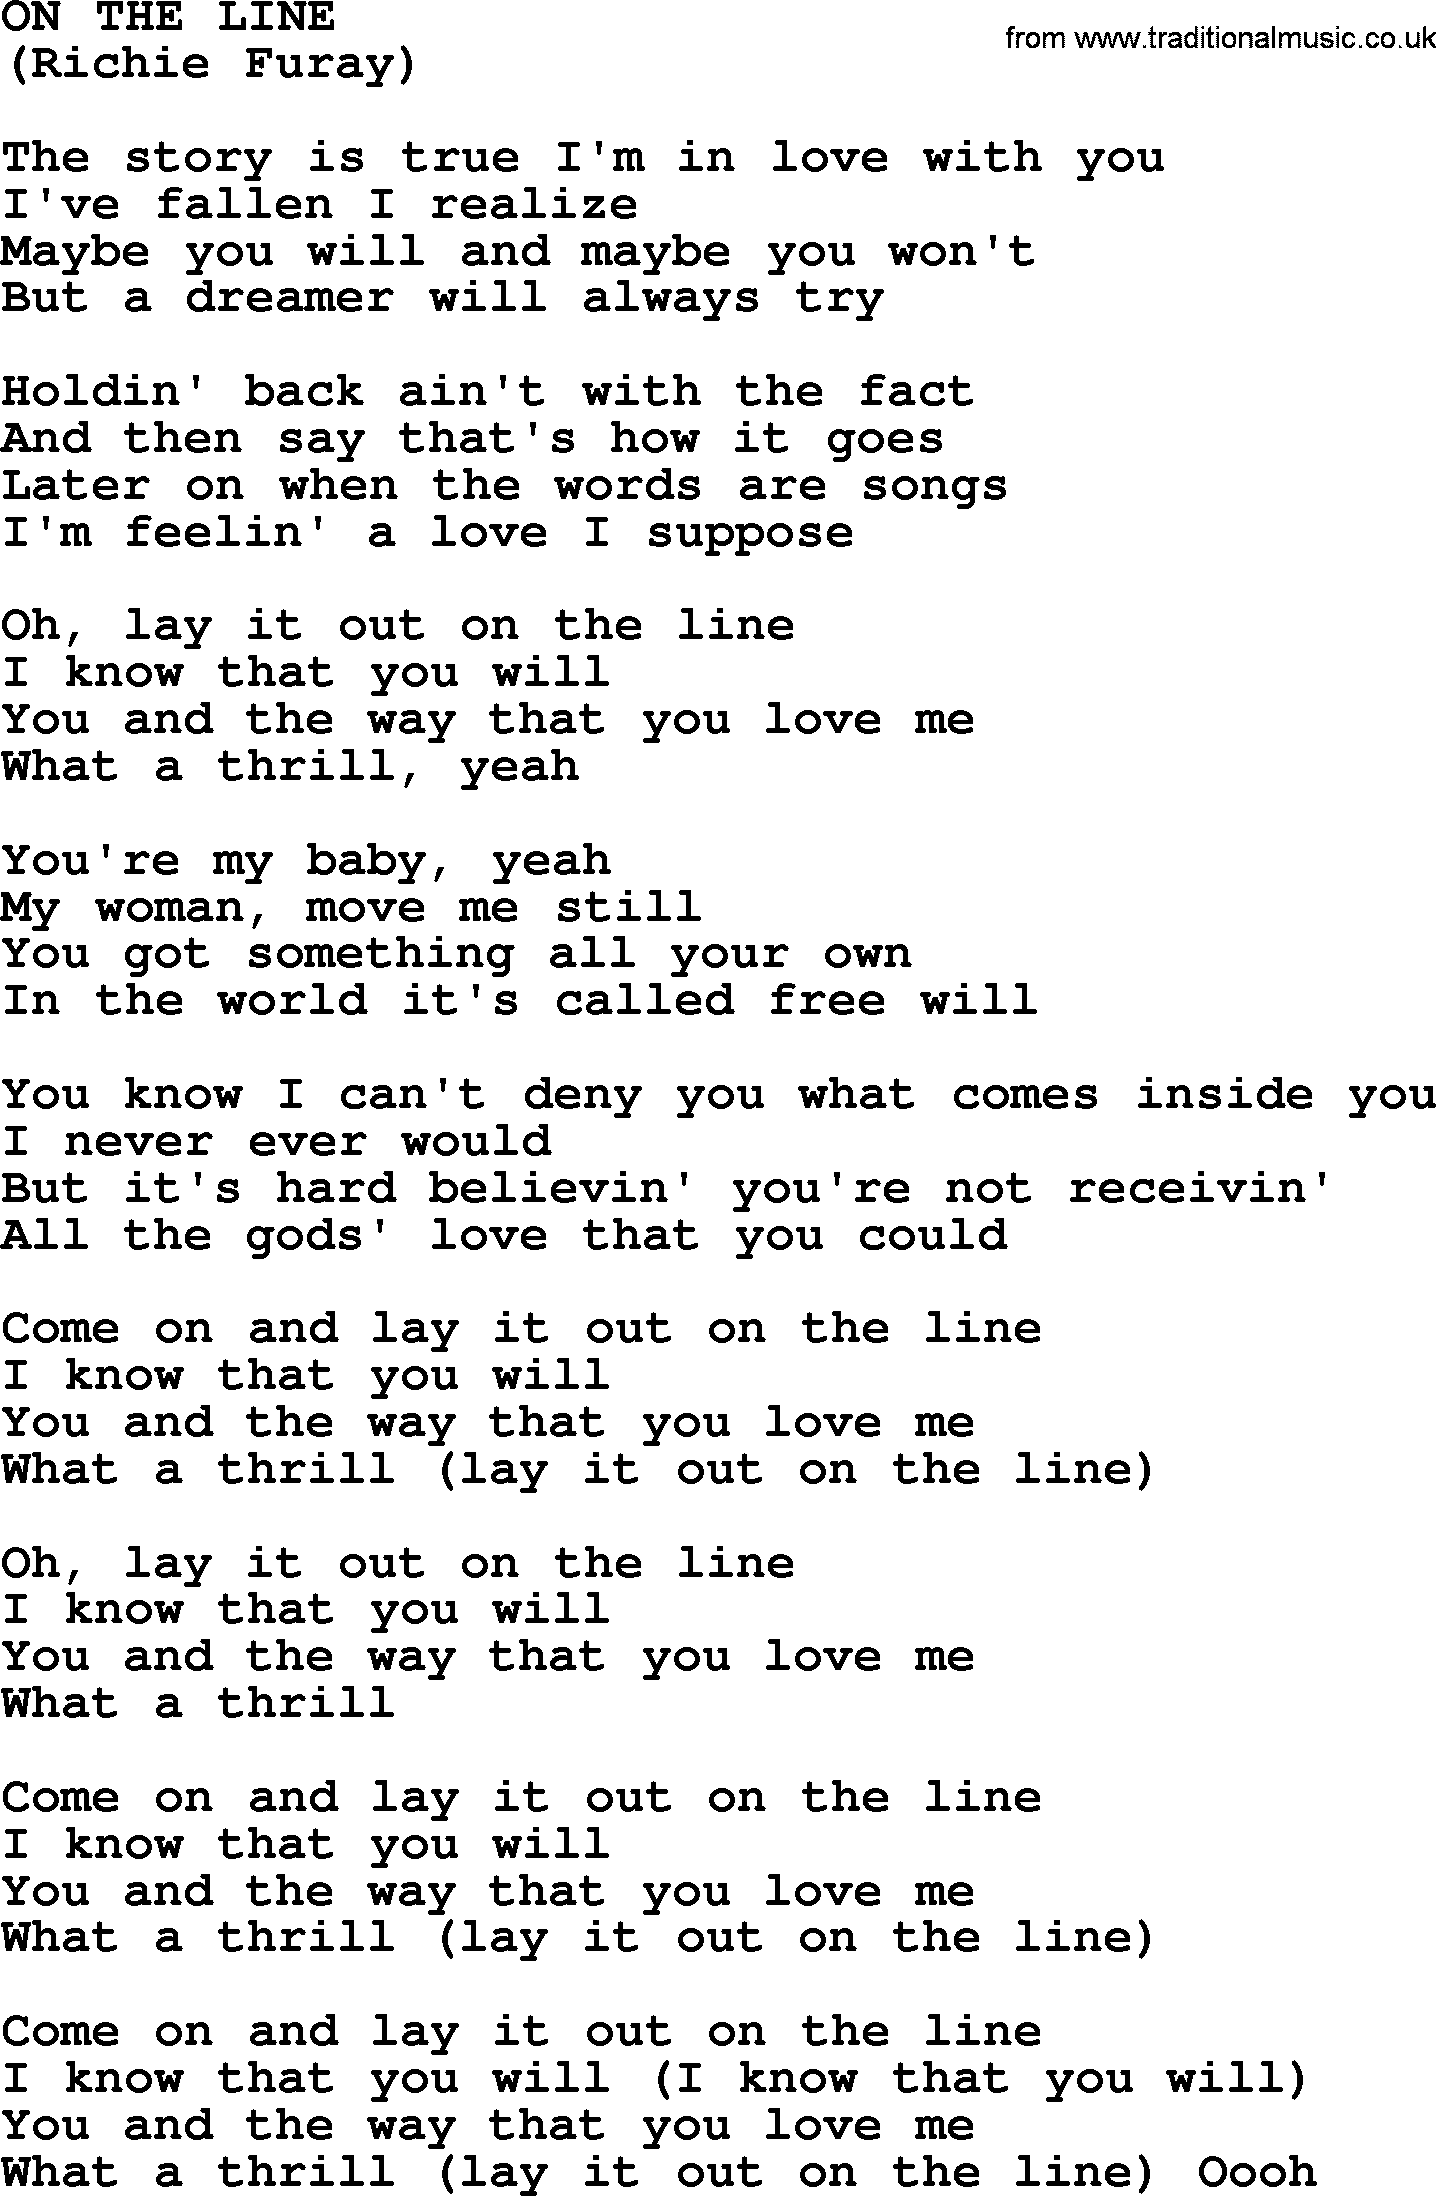 The Byrds song On The Line, lyrics